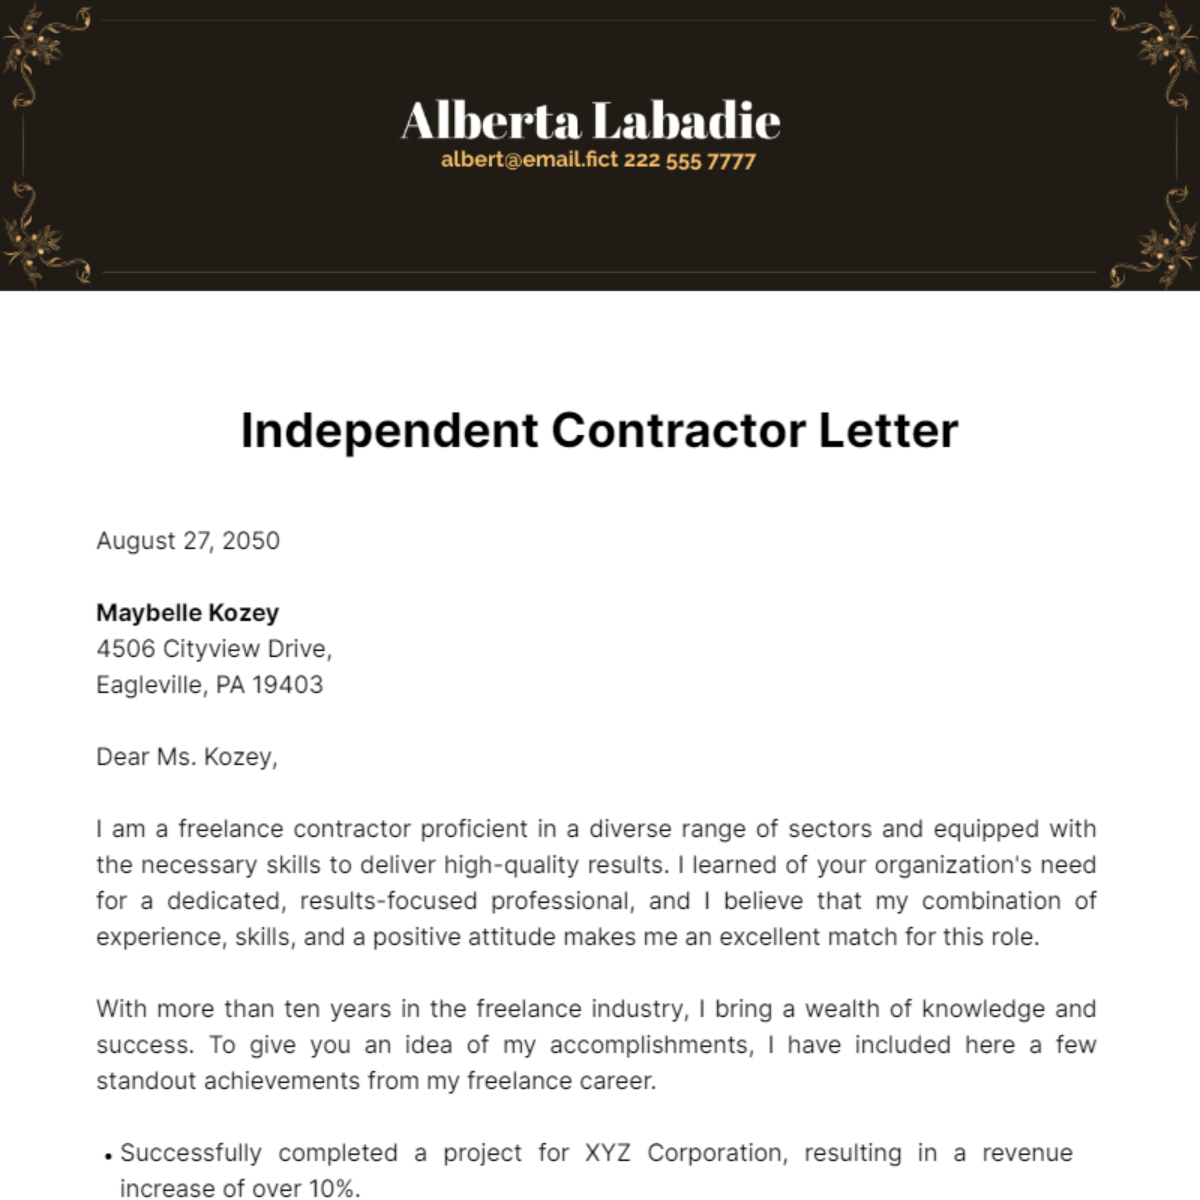 Independent Contractor Letter Template